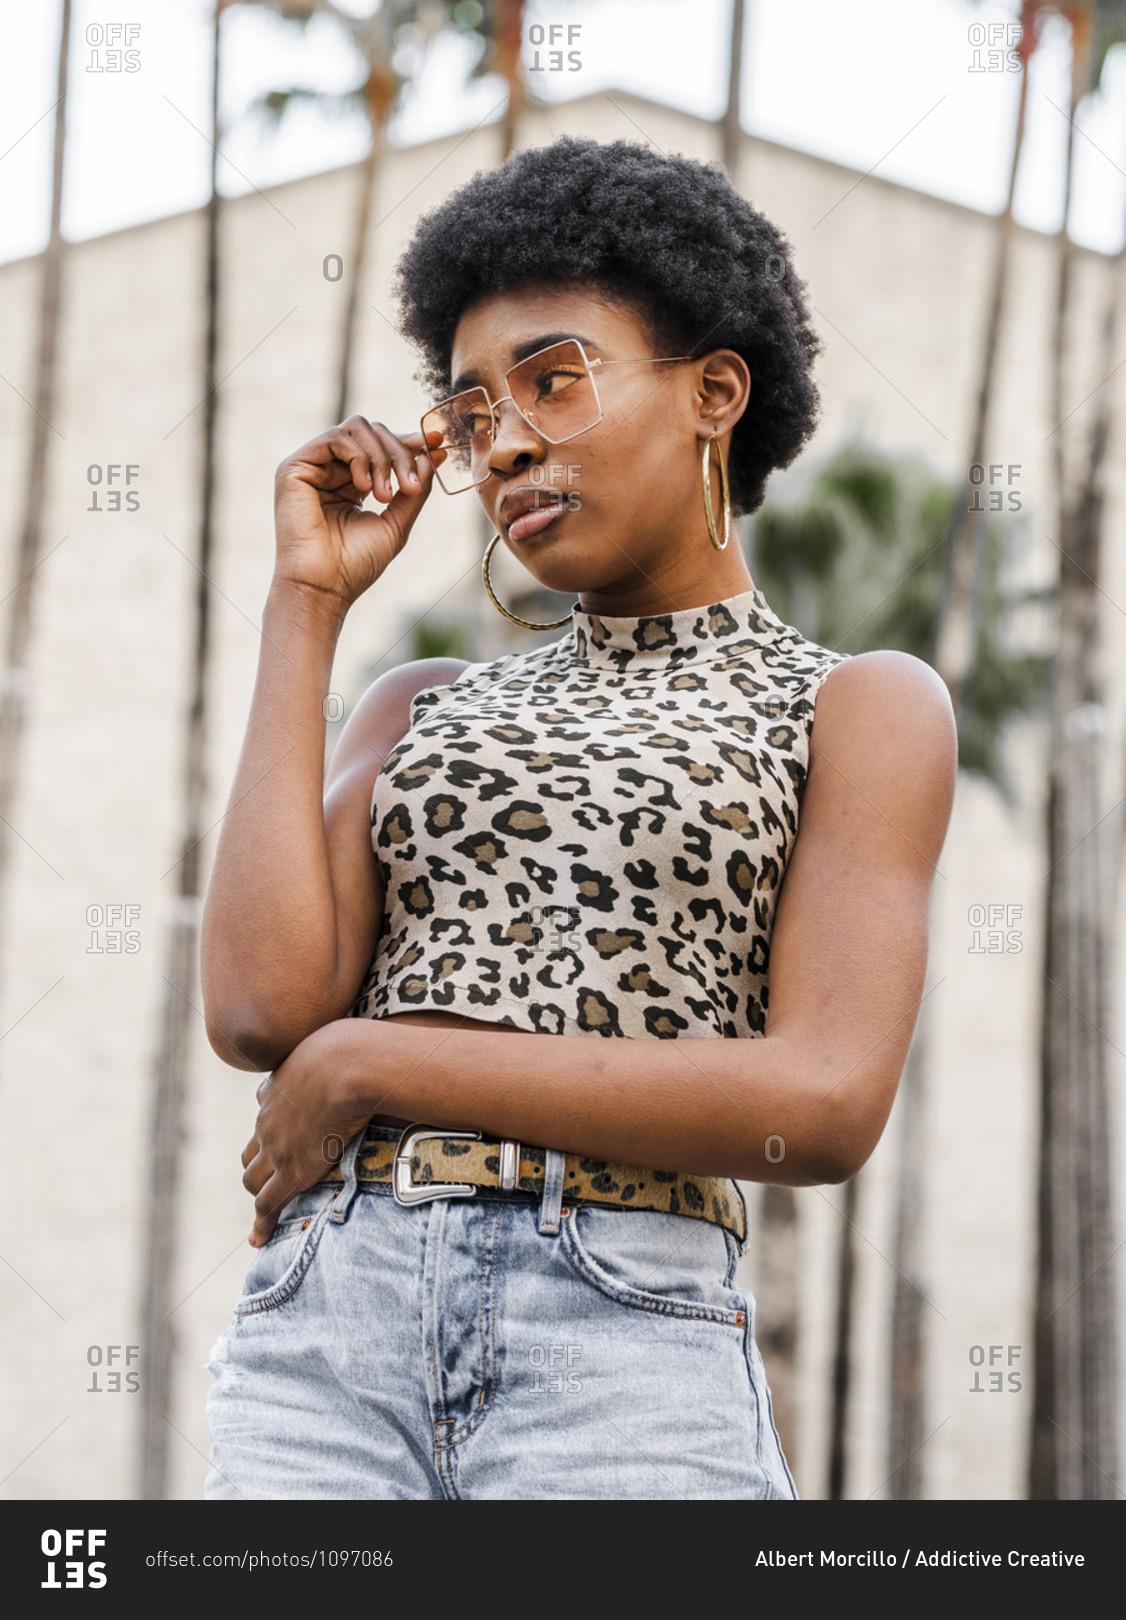 Confident stylish young African American female with curly hair dressed in jeans and crop top with animal print n casual outfit and trendy sunglasses looking away while standing on urban street